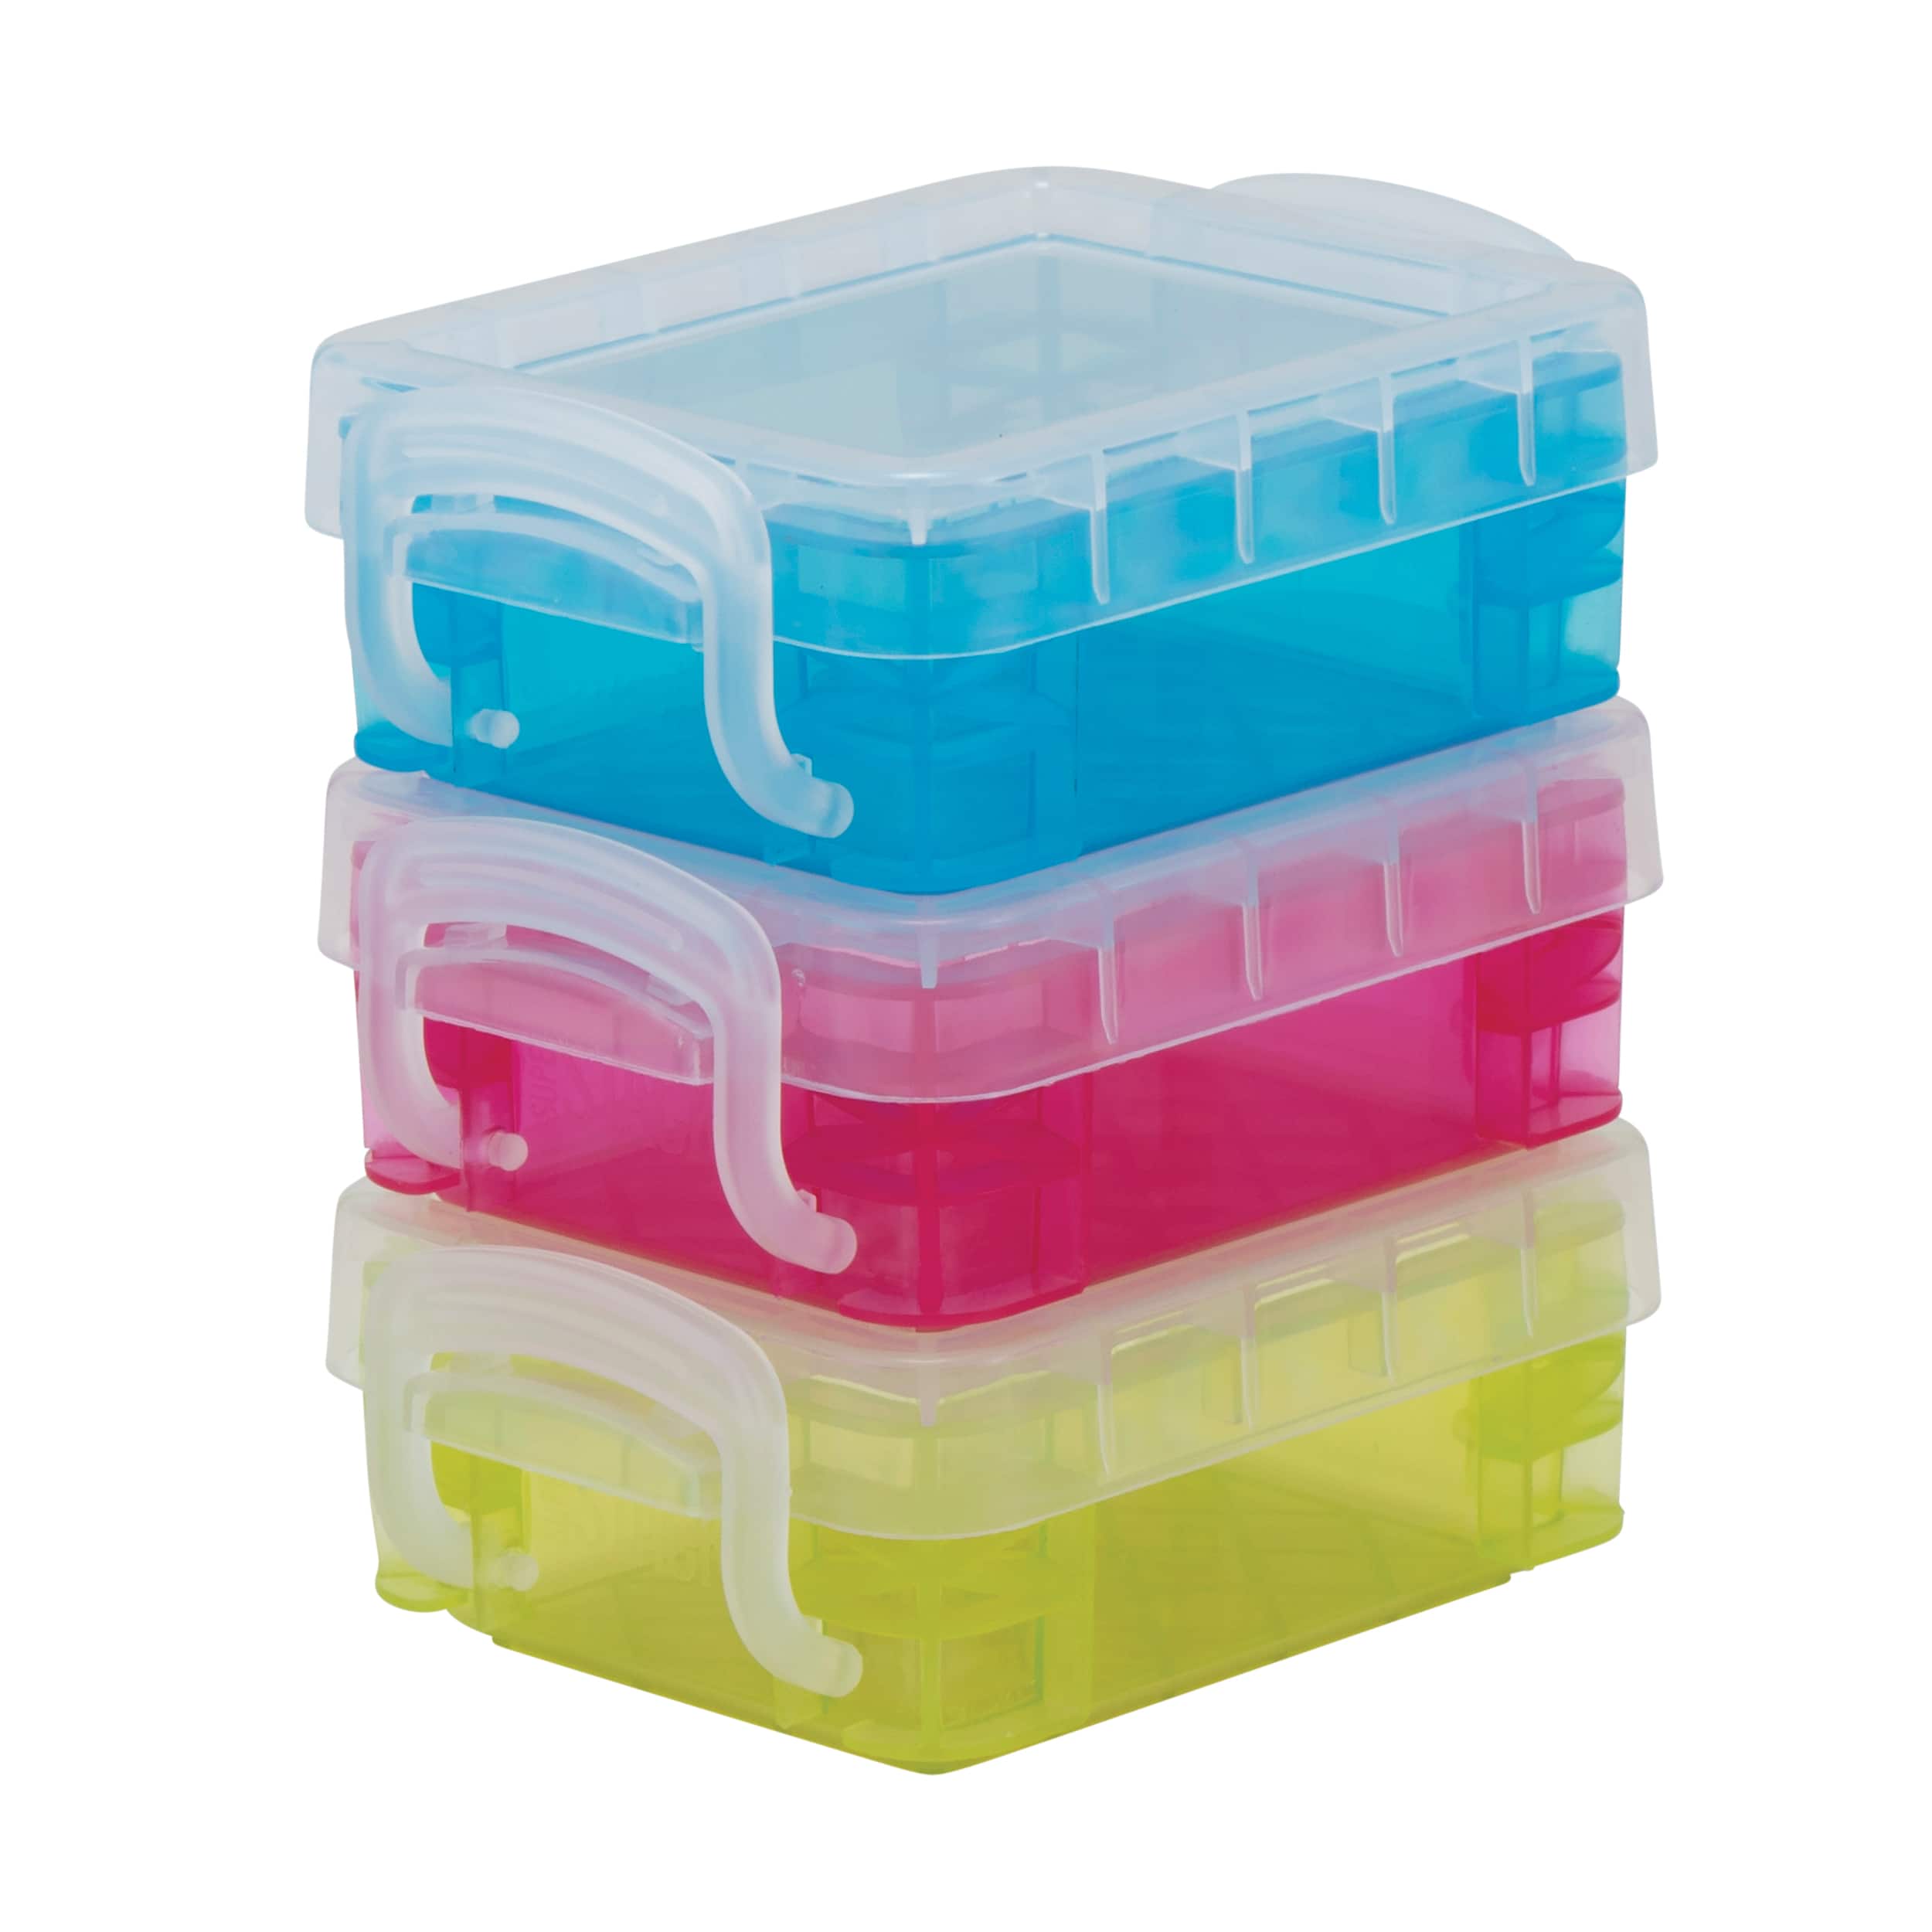 Wholesale LOGIX 12533 Stackable Handle, Locking Art Supply, Plastic Storage  Containers with Lids, Craft Organizer Box, Made in The U.S.A, Teal